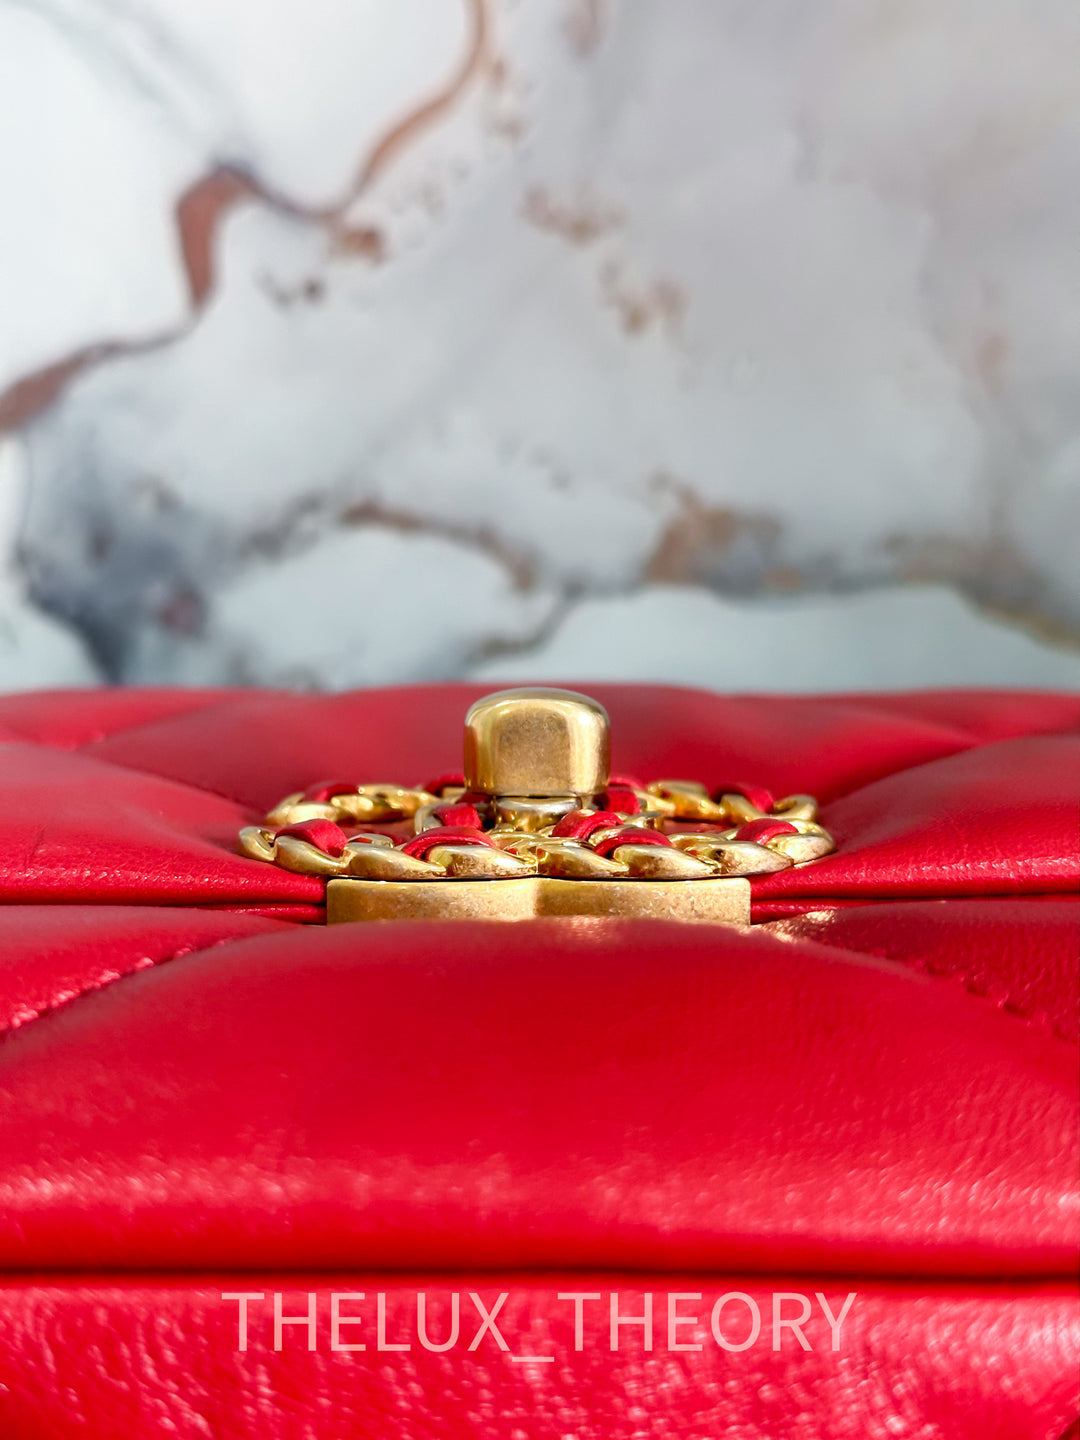 20B RED SMALL 19 FLAP BAG GOAT SKIN AGED GOLD HARDWARE